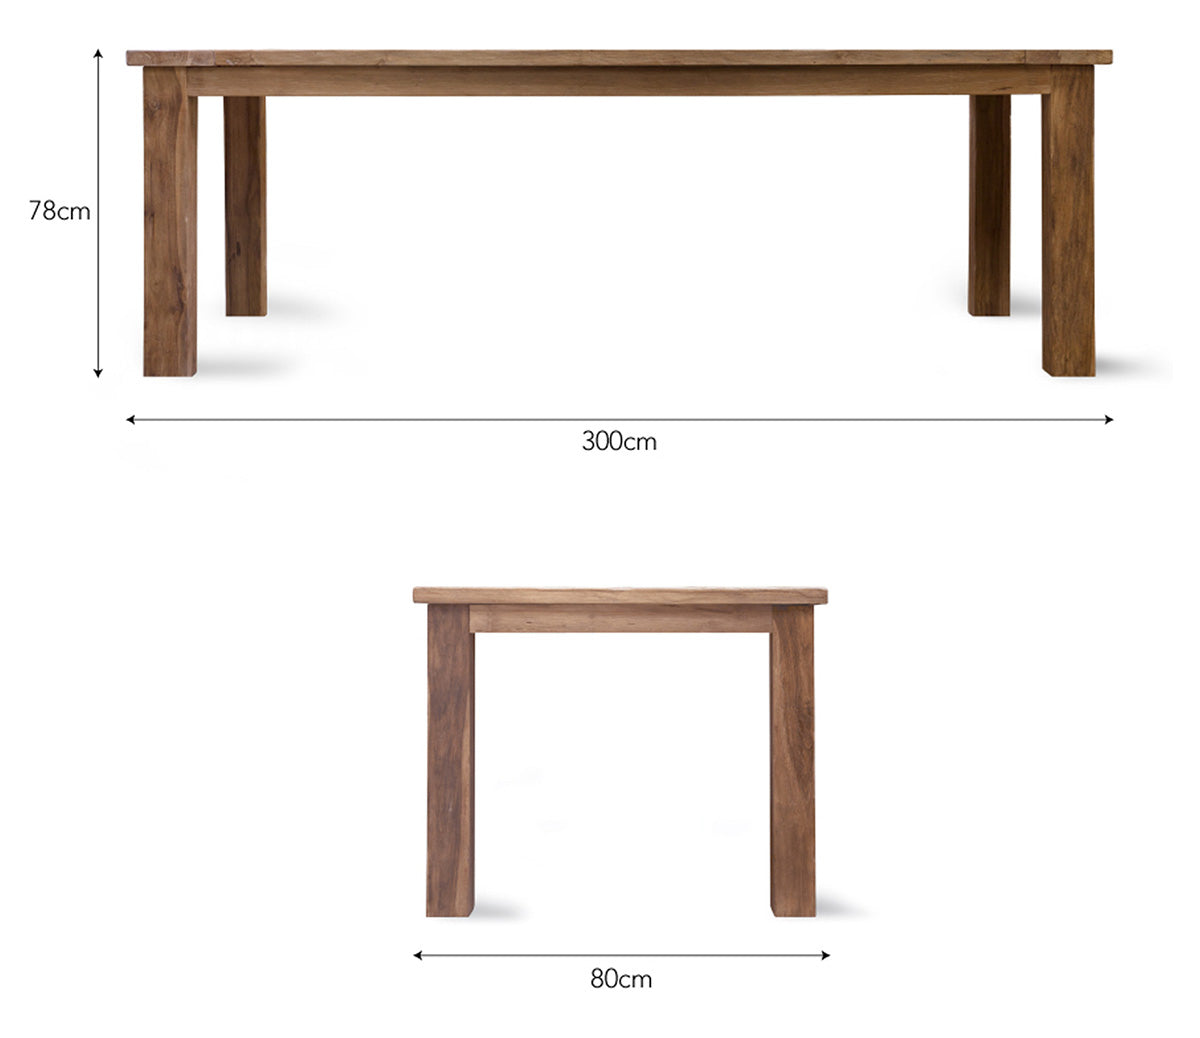 Garden Trading St Mawes Refectory Table Overview